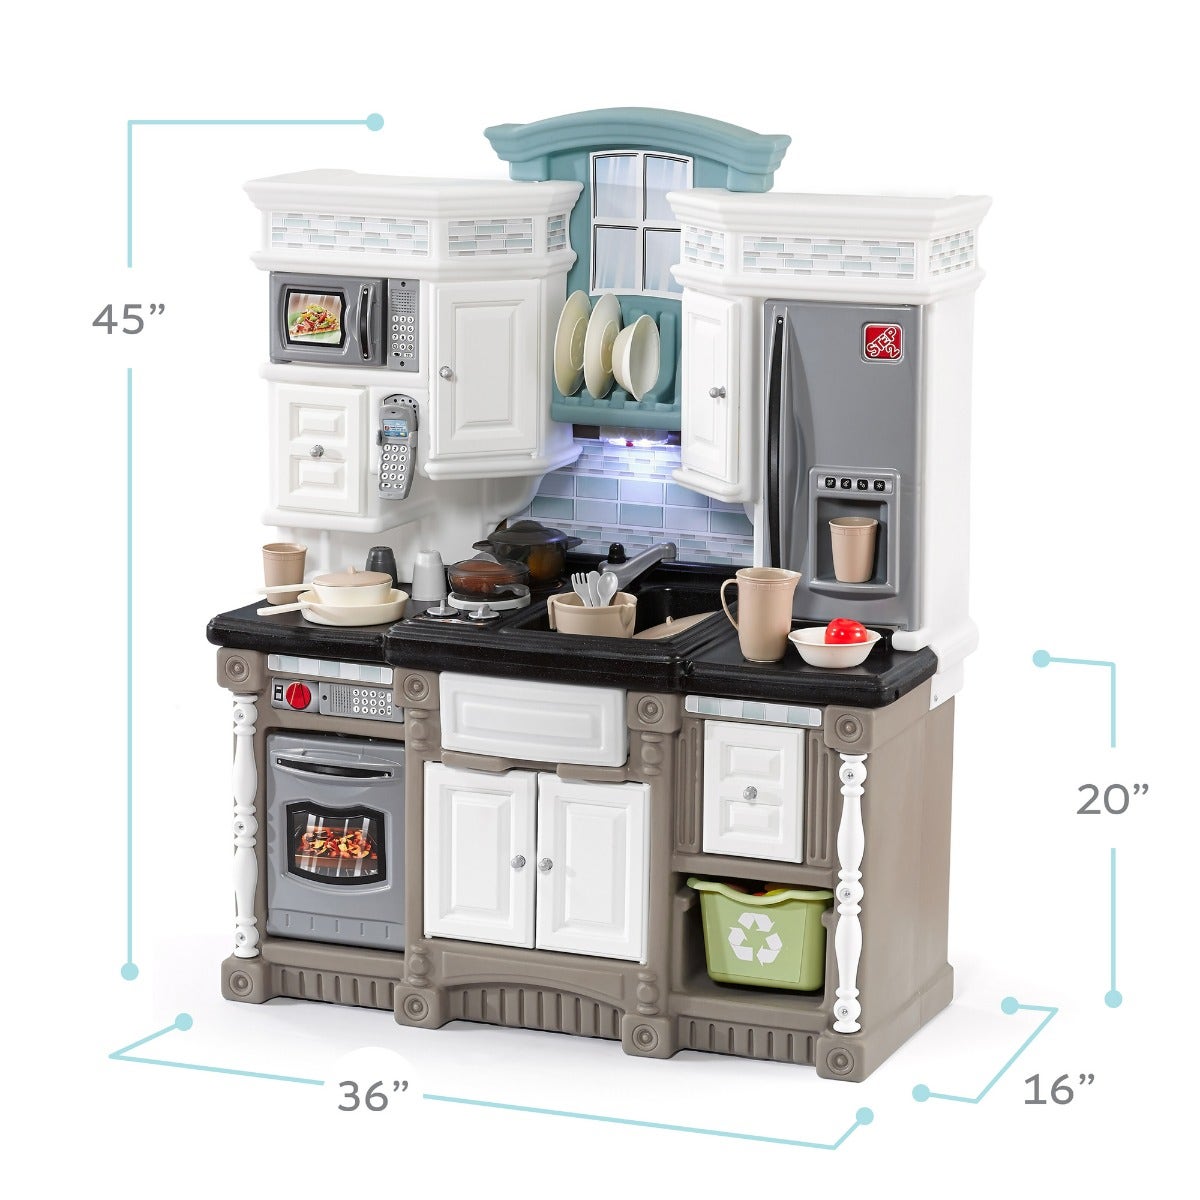 LifeStyle™ Dream Kitchen from Step2